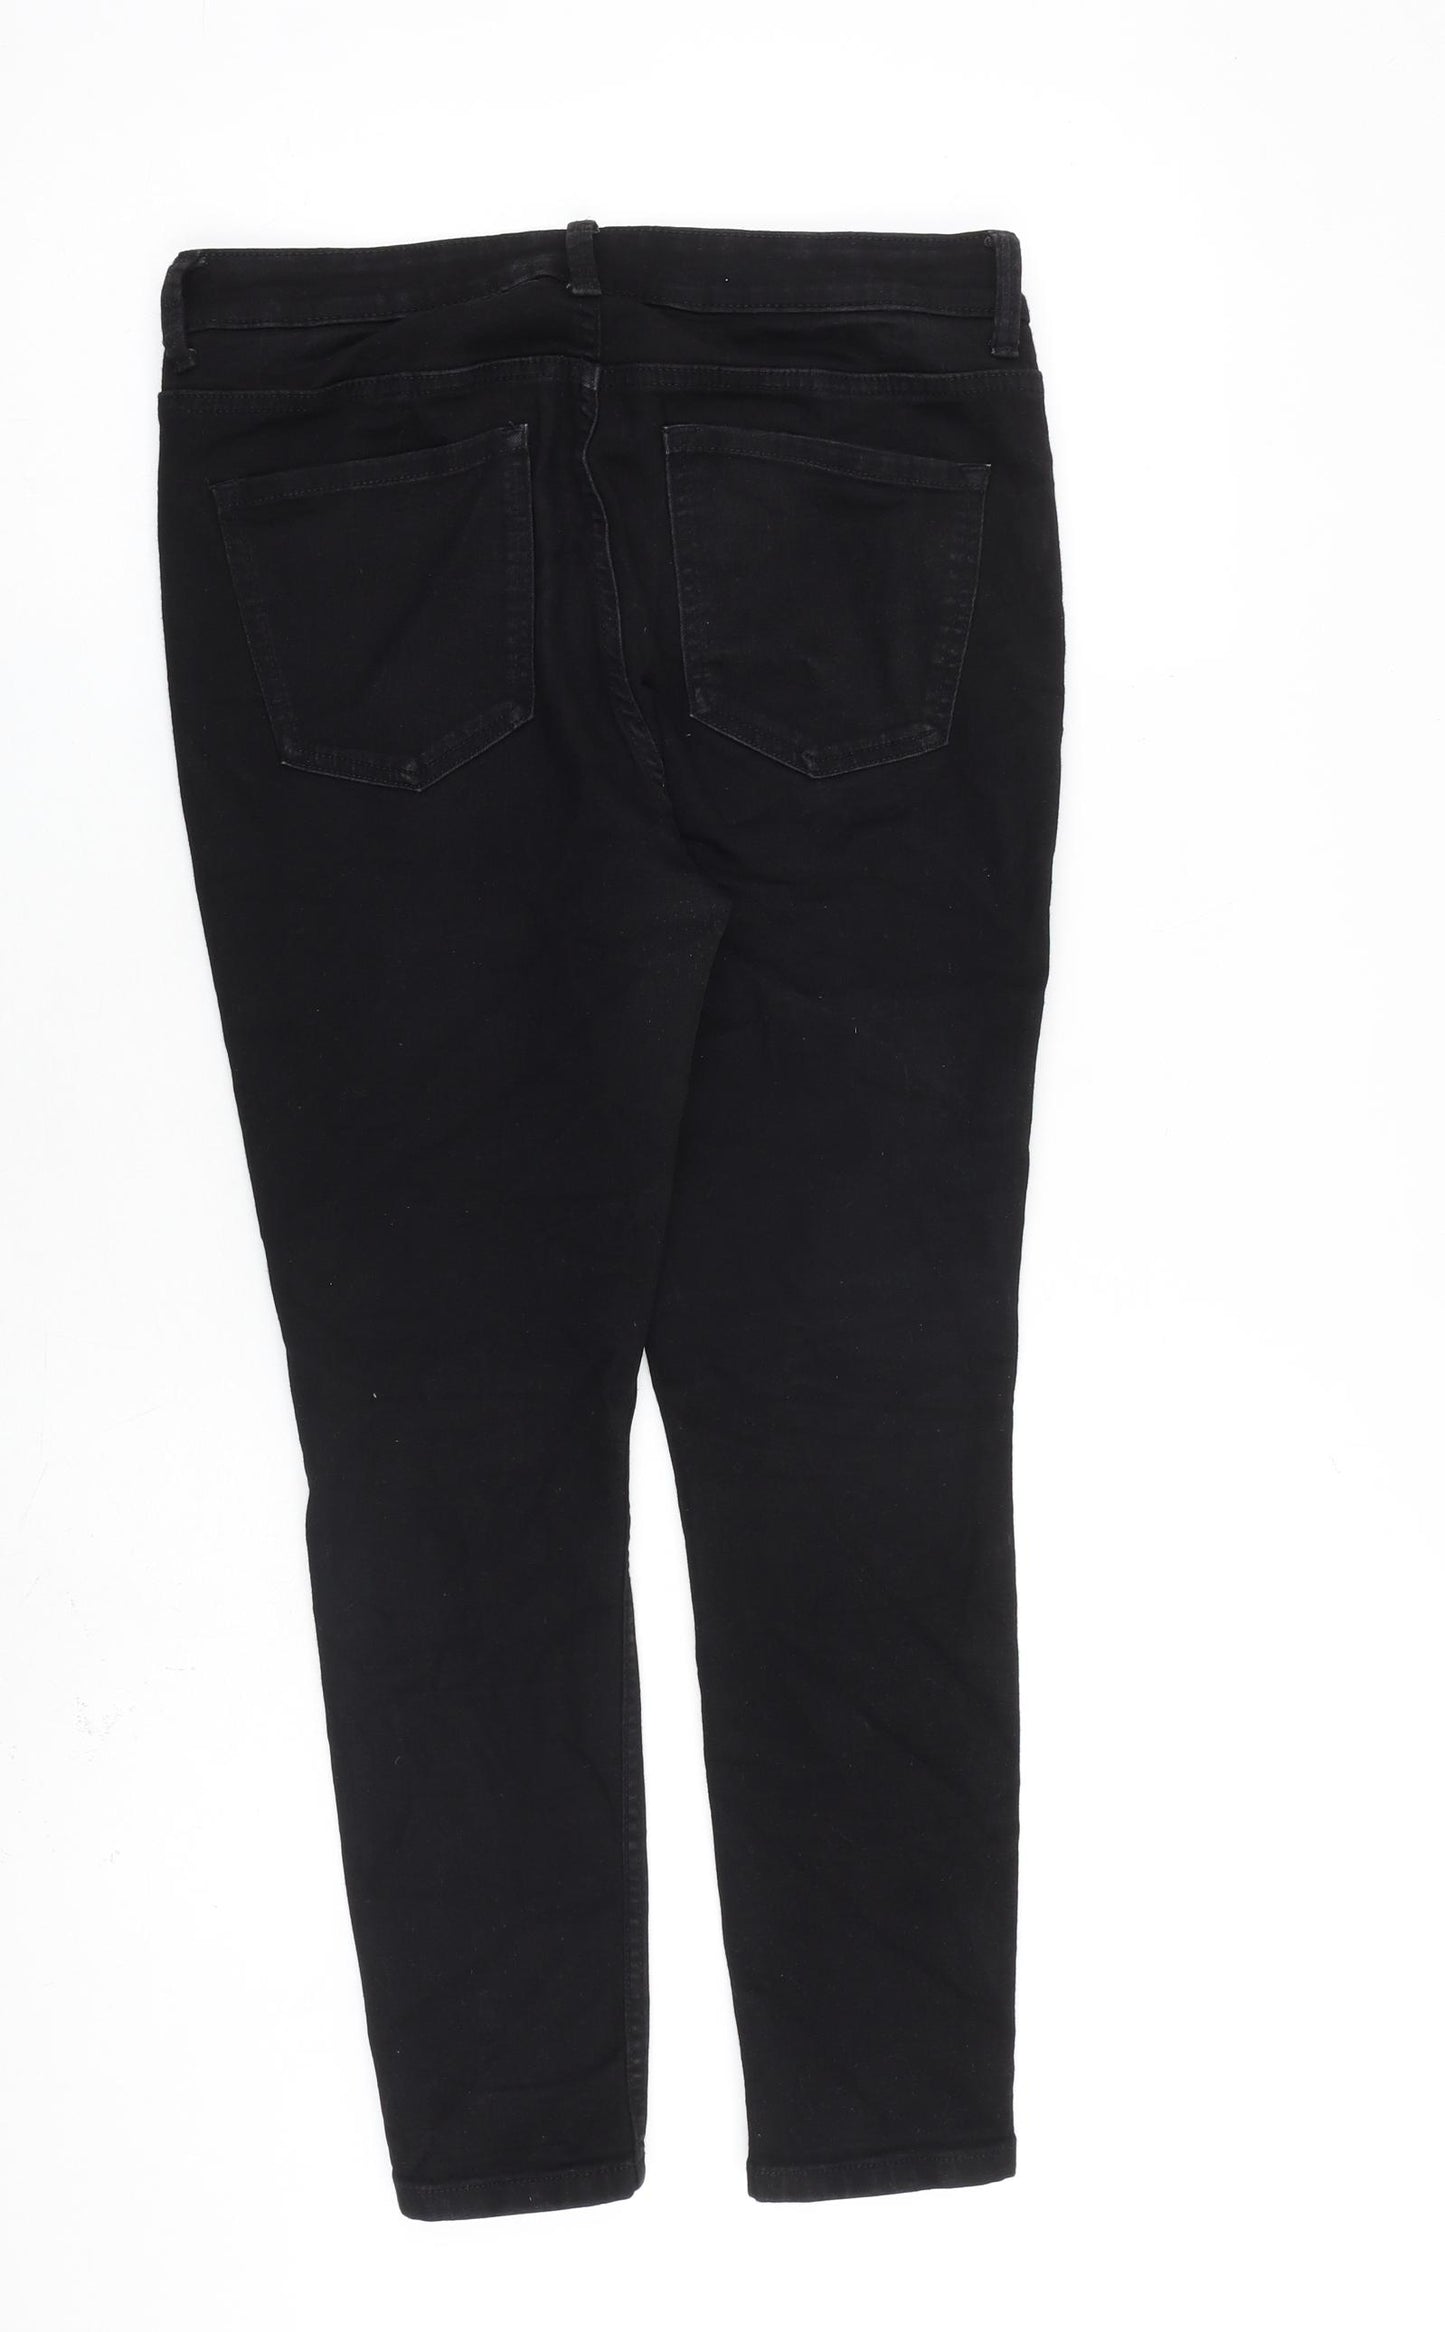 Marks and Spencer Womens Black Cotton Skinny Jeans Size 12 L26 in Slim Zip